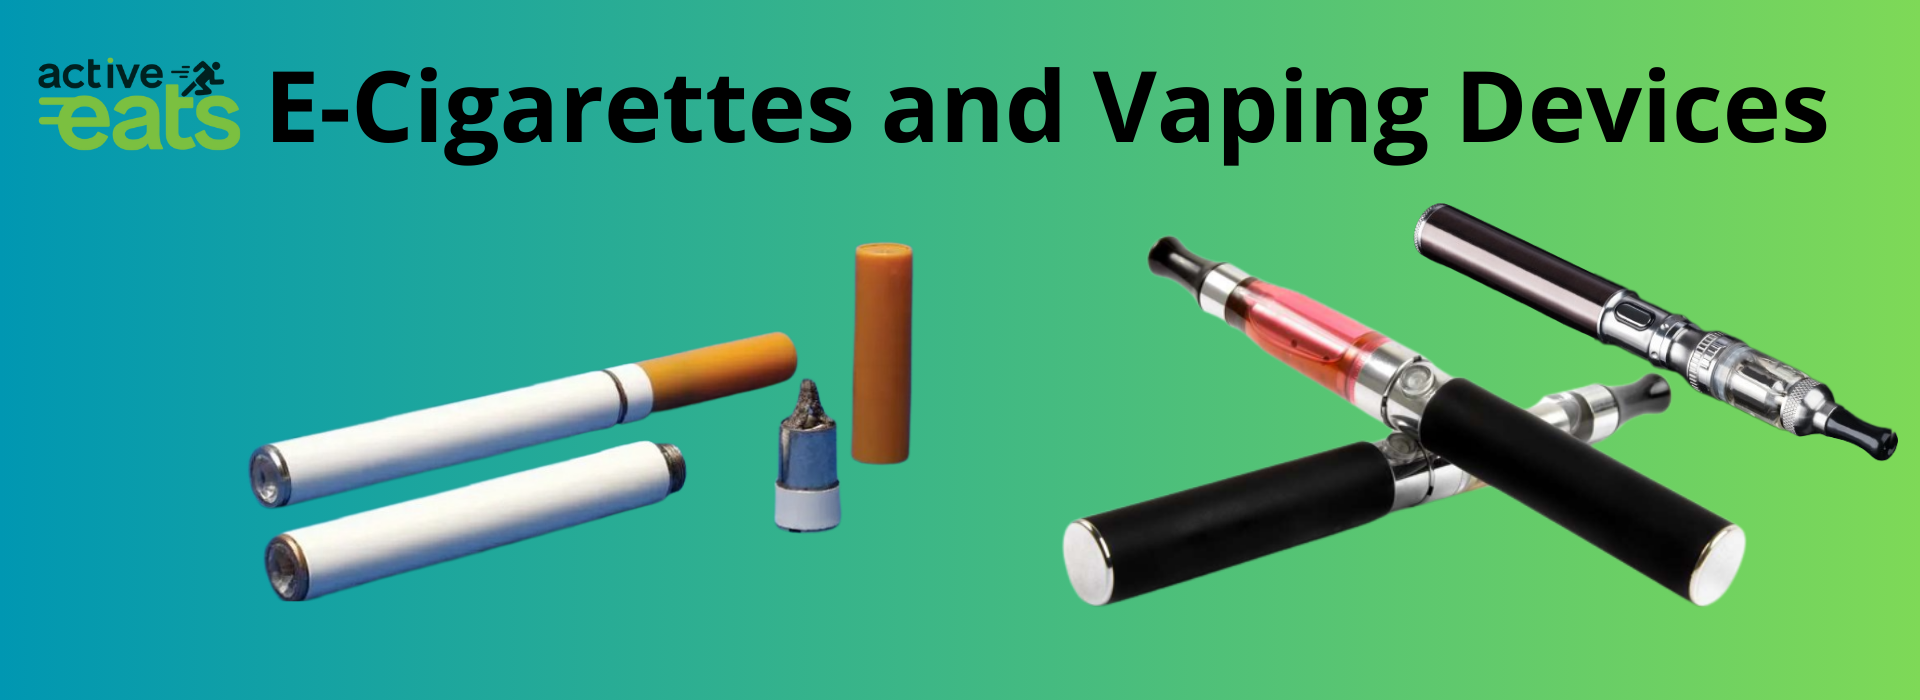 Image showing e-cigarettes and vaping devices.